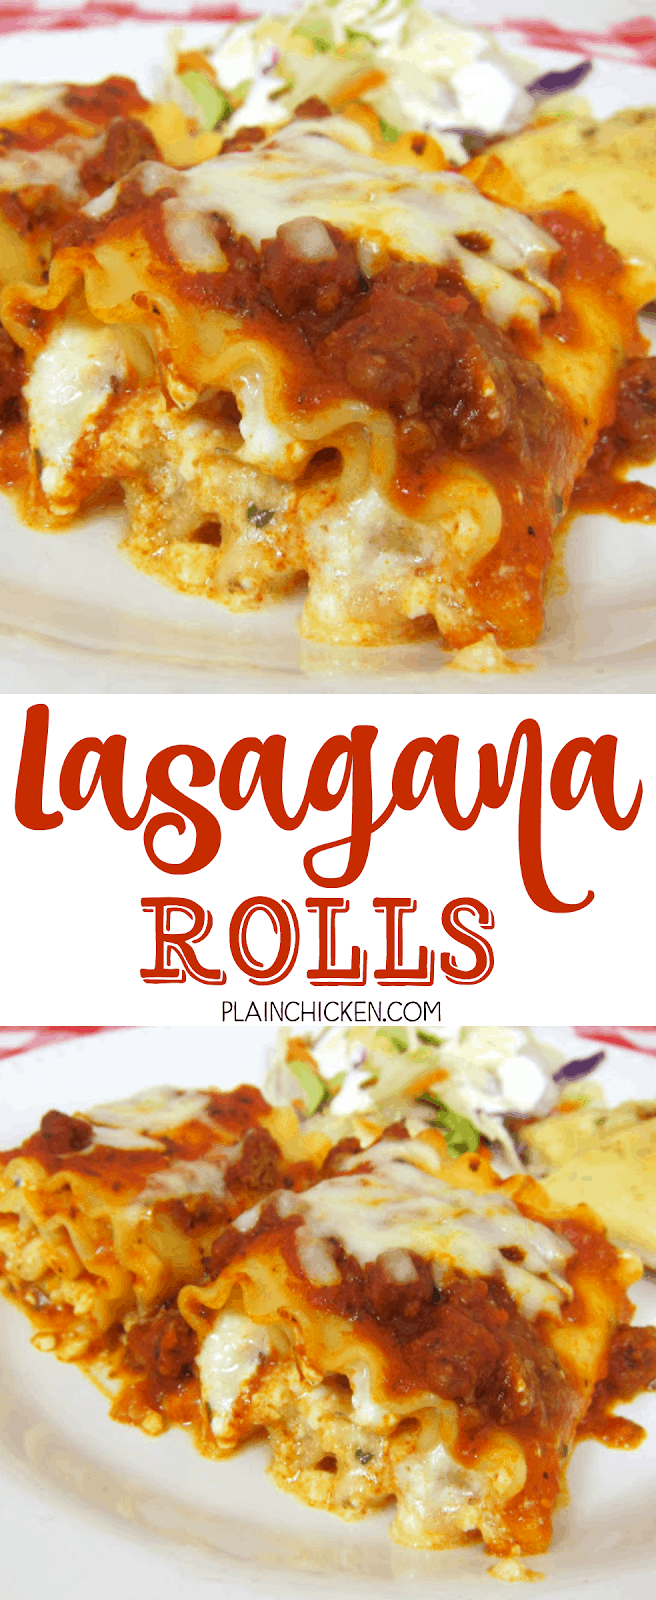 Lasagna Rolls Recipe - Lasagna noodles, topped with cheeses, rolled up and topped with sauce and mozzarella - great make-ahead meal. Can also freeze unbaked.